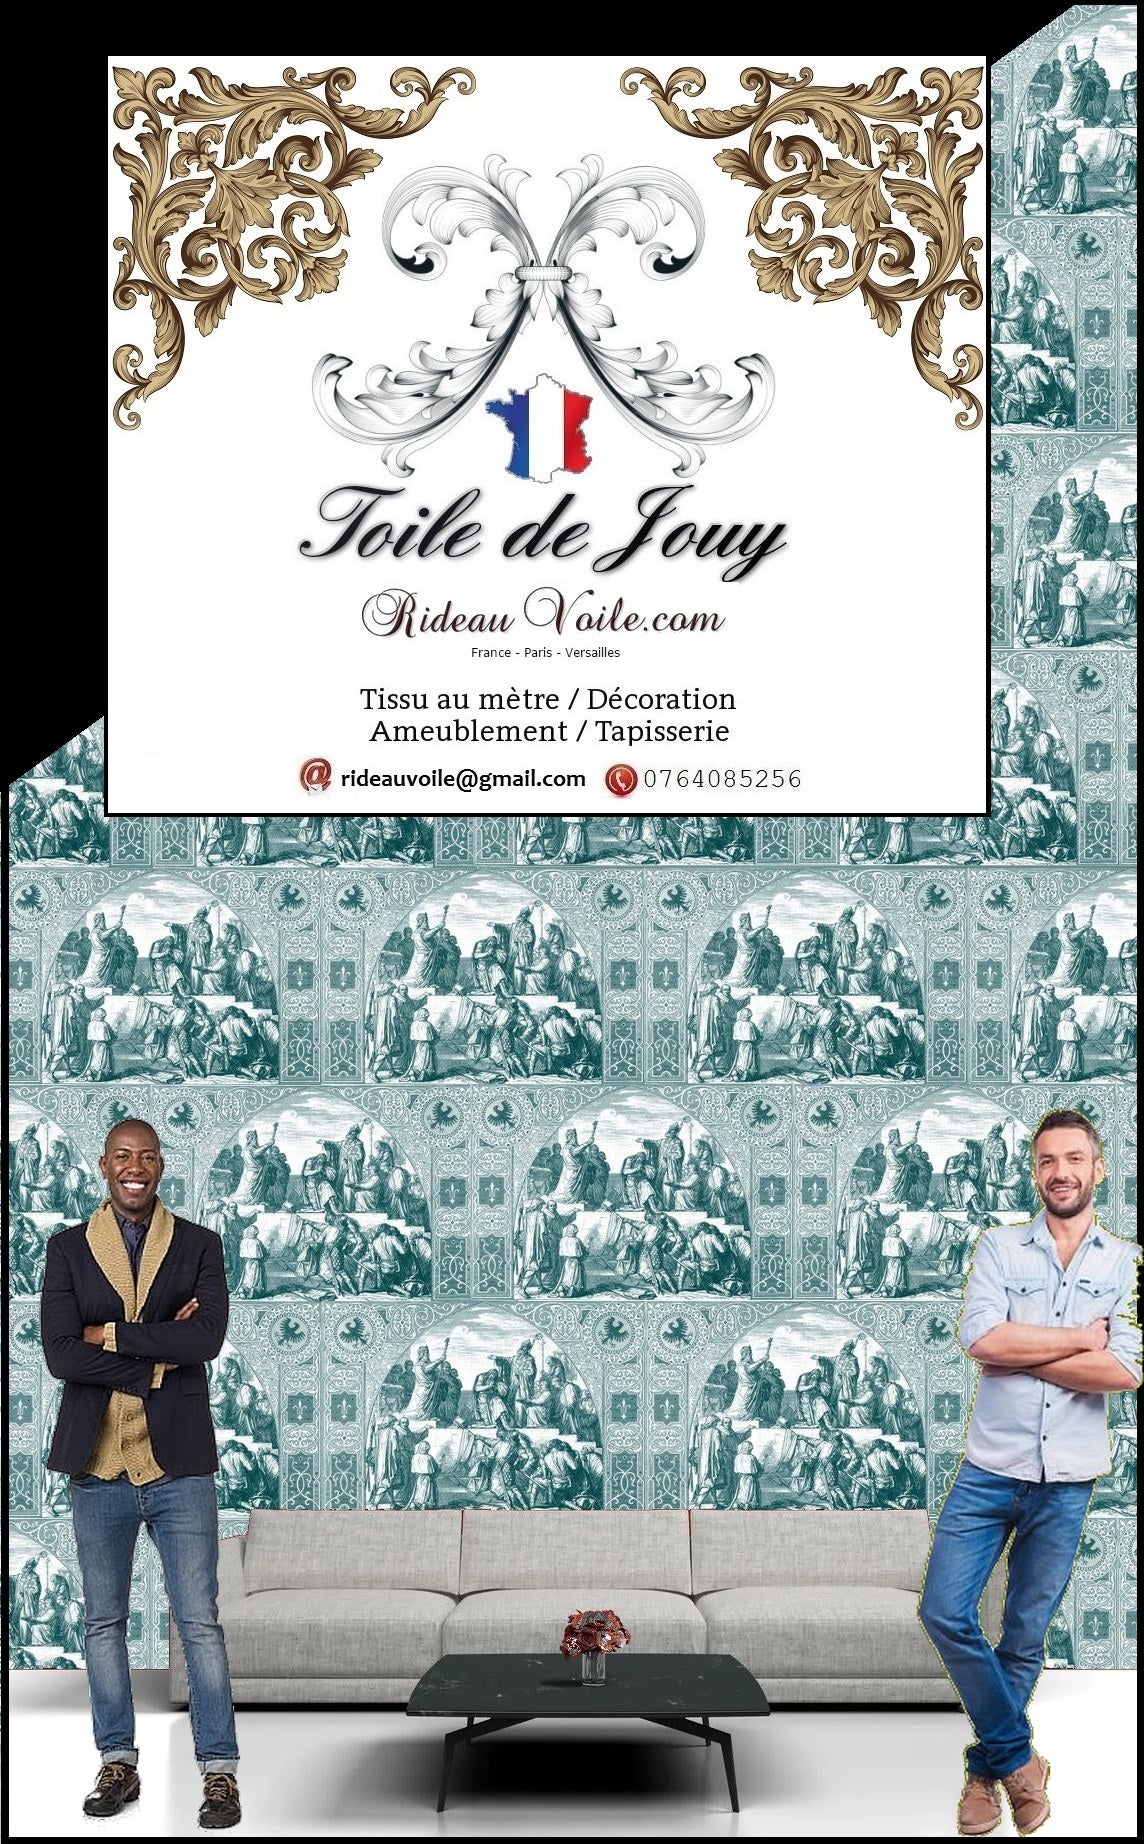 Toile de Jouy luxury french fabrics printed design decorating home furnishing tapestry ameublement tissu décoration tapisserie rideau papier peint interior 